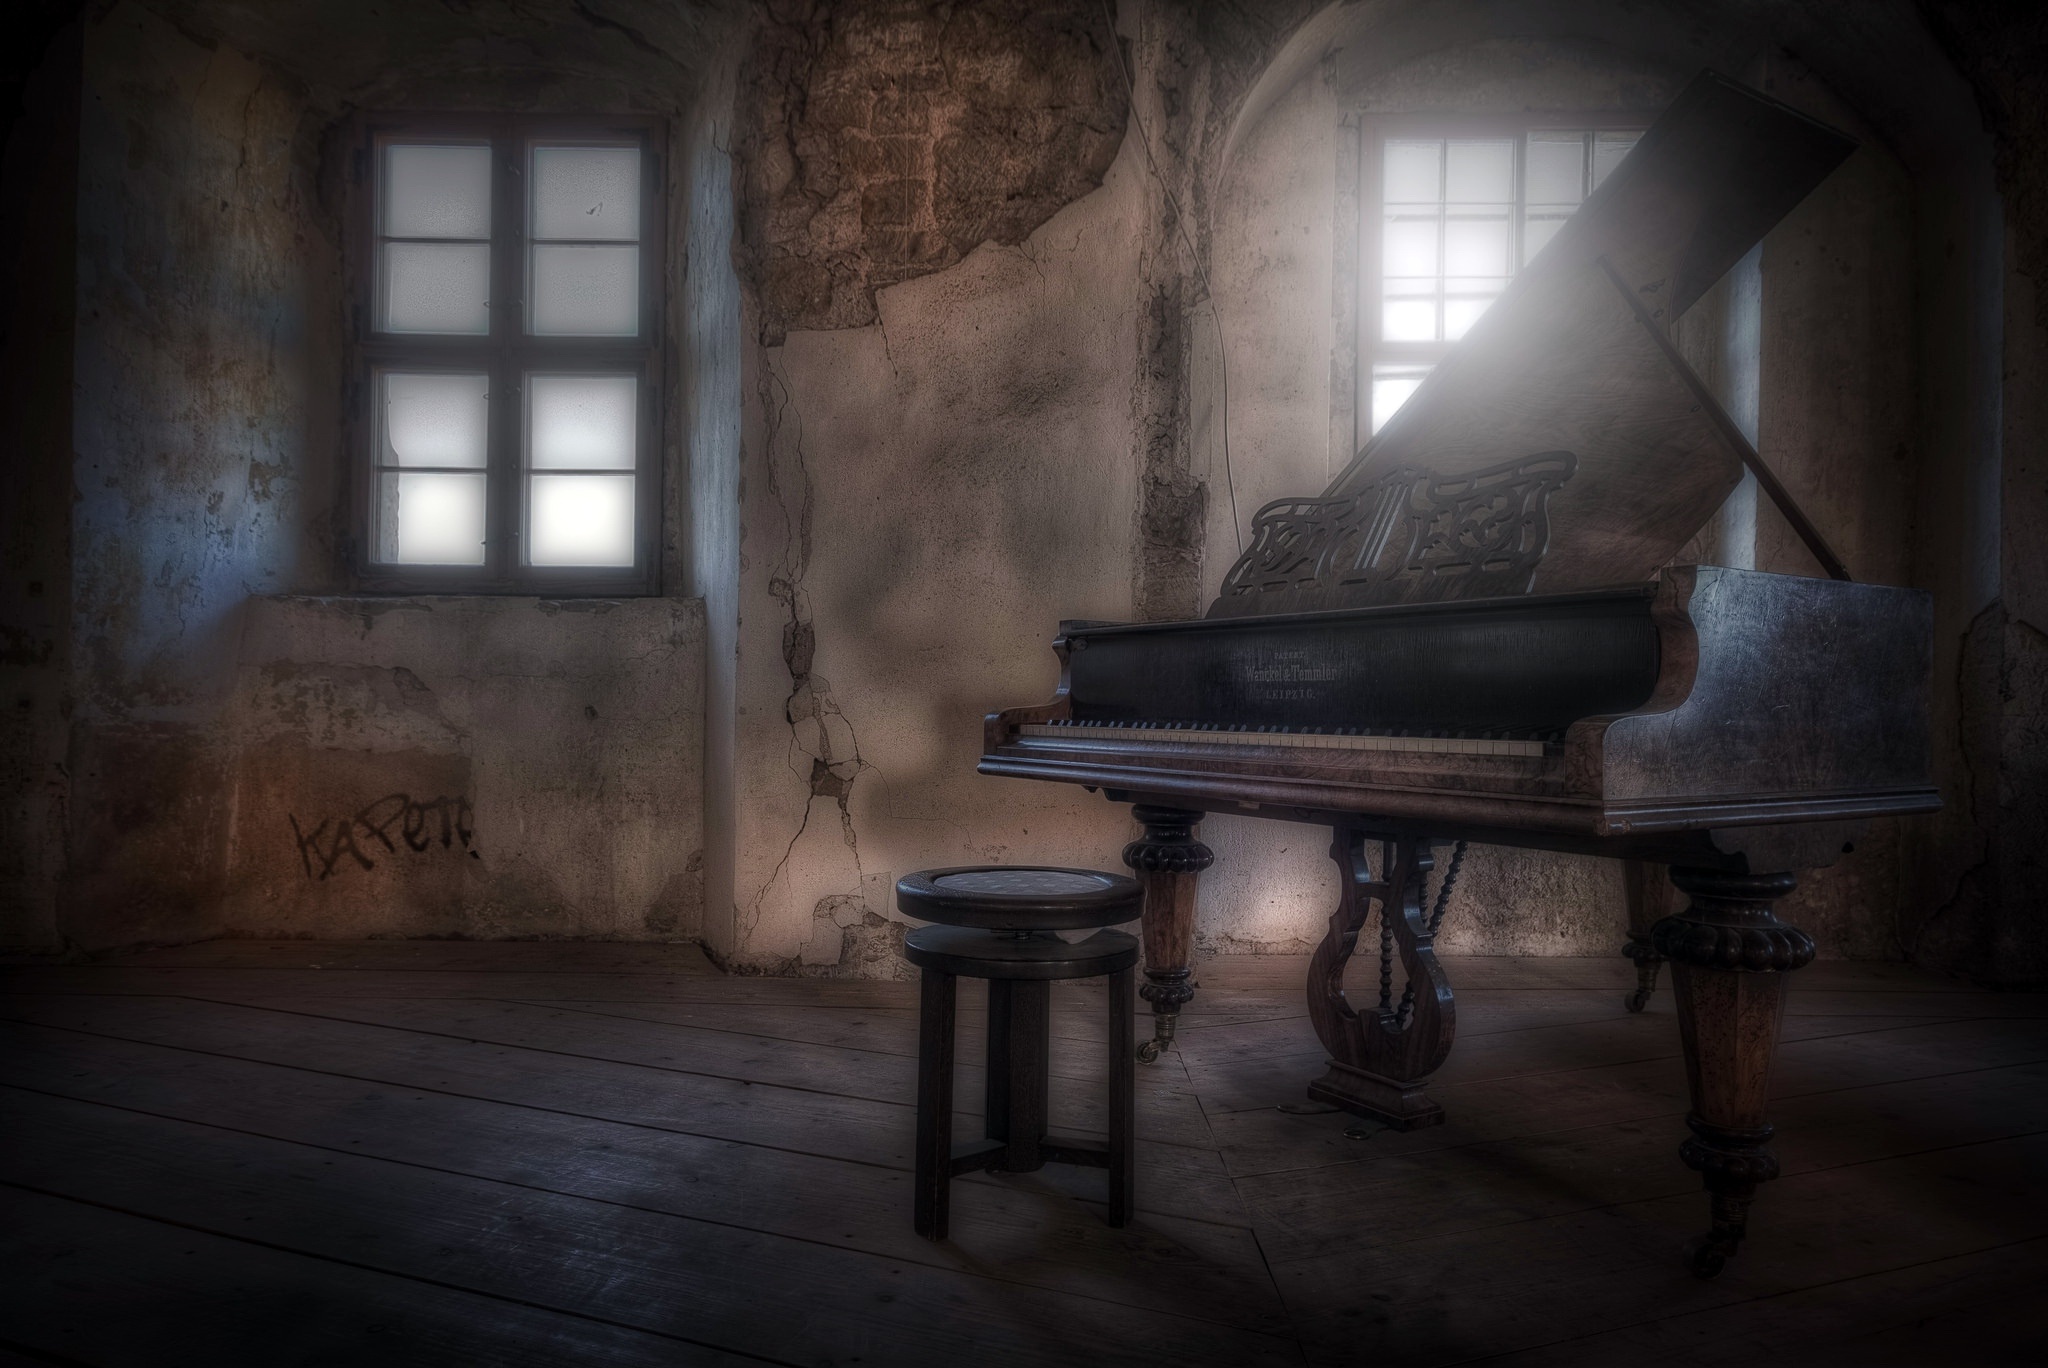 Grand Piano: A musical instrument having steel wire strings that sound when struck by felt-covered hammers, Old house. 2050x1370 HD Wallpaper.